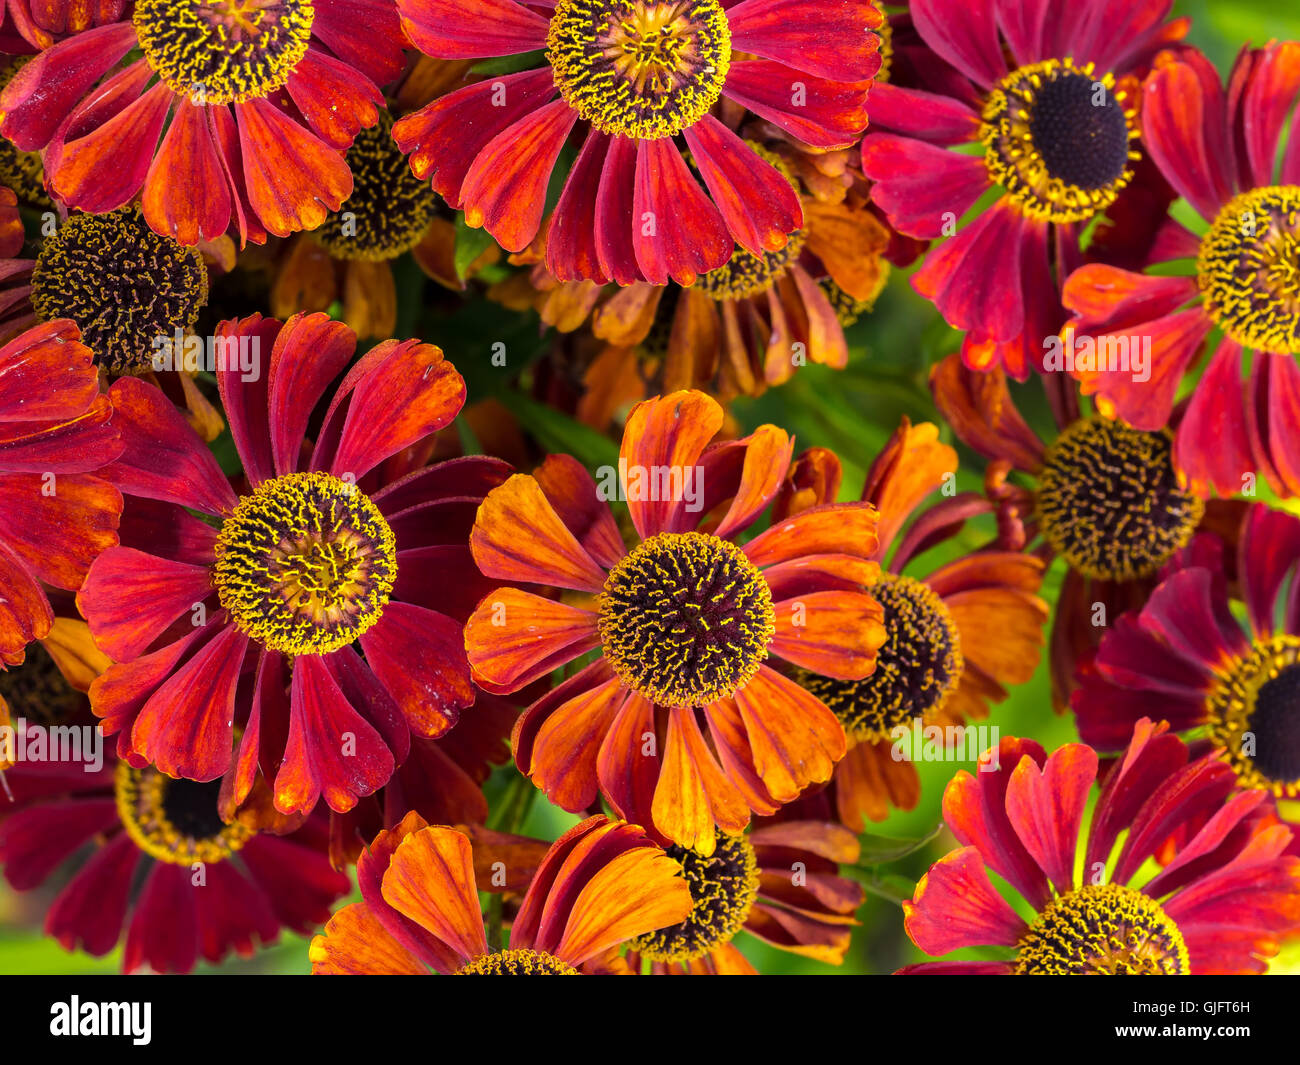 Bunch of Helenium autumnale flowers shot from above Stock Photo